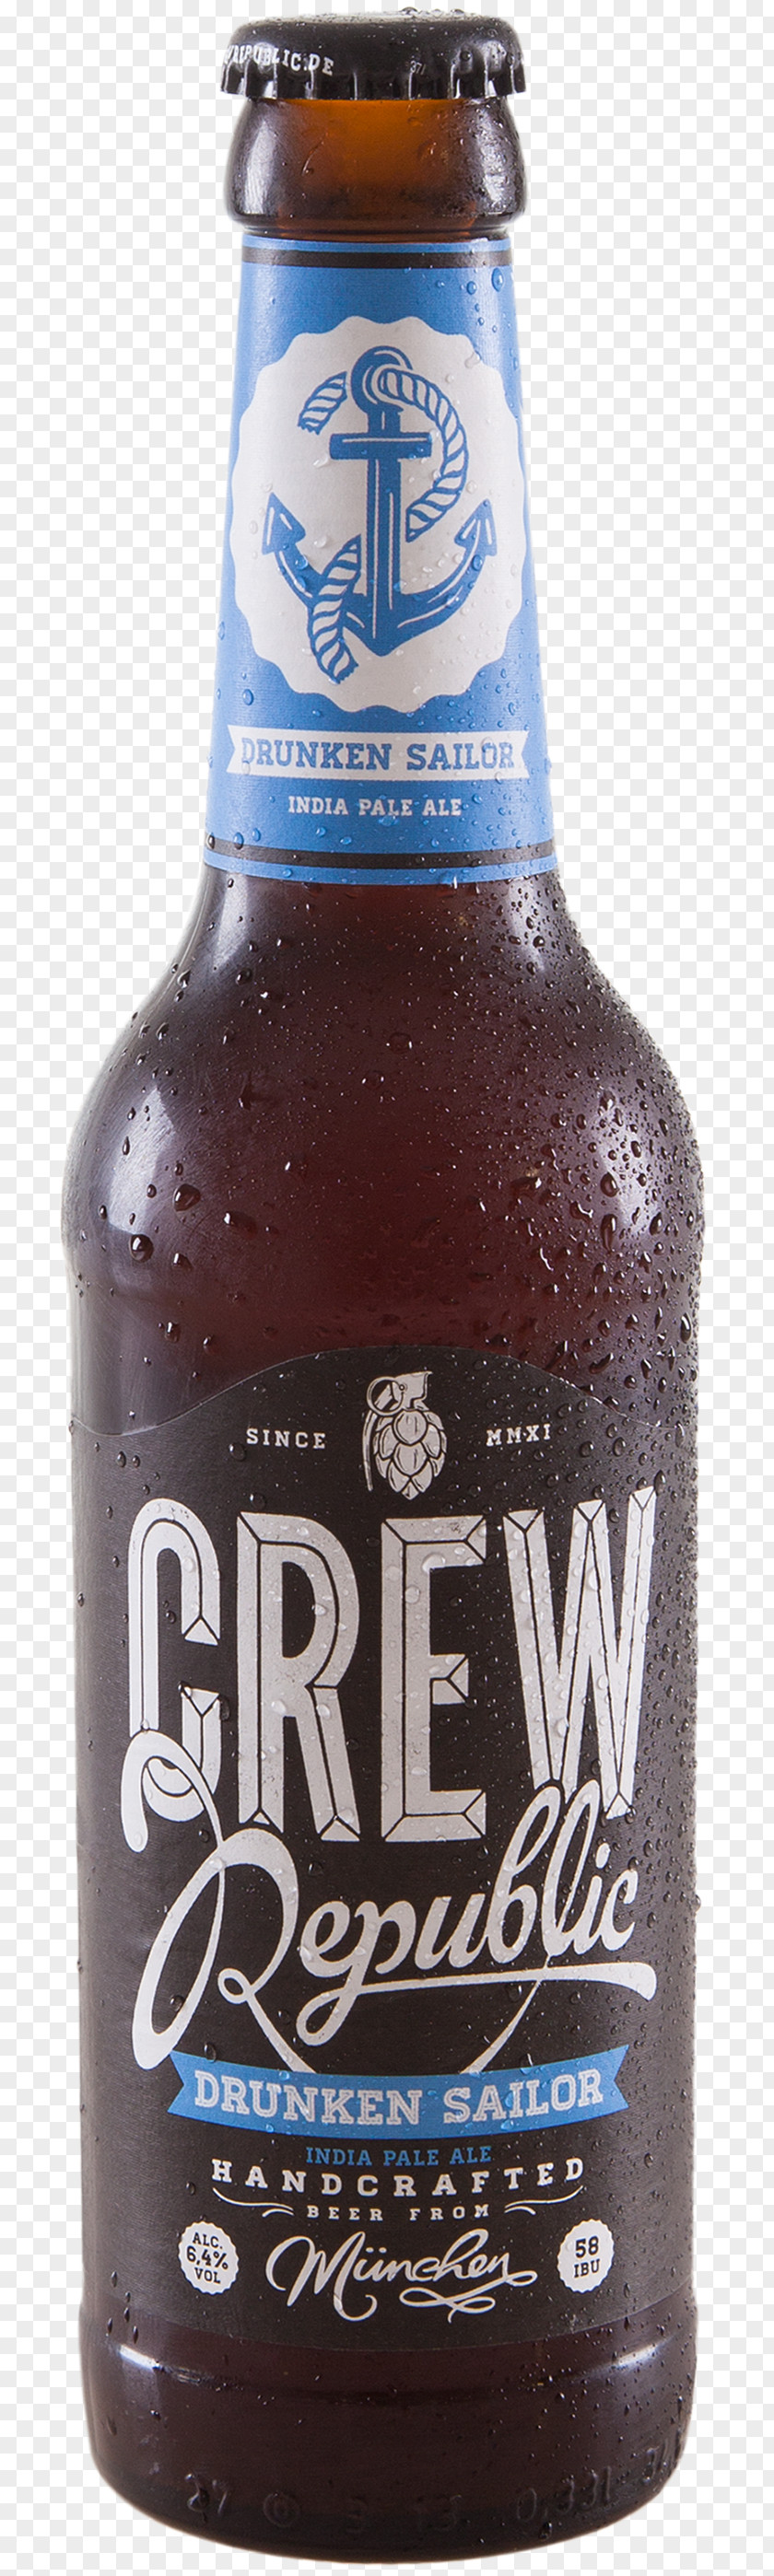 India Pale Ale CREW Republic Beer PNG